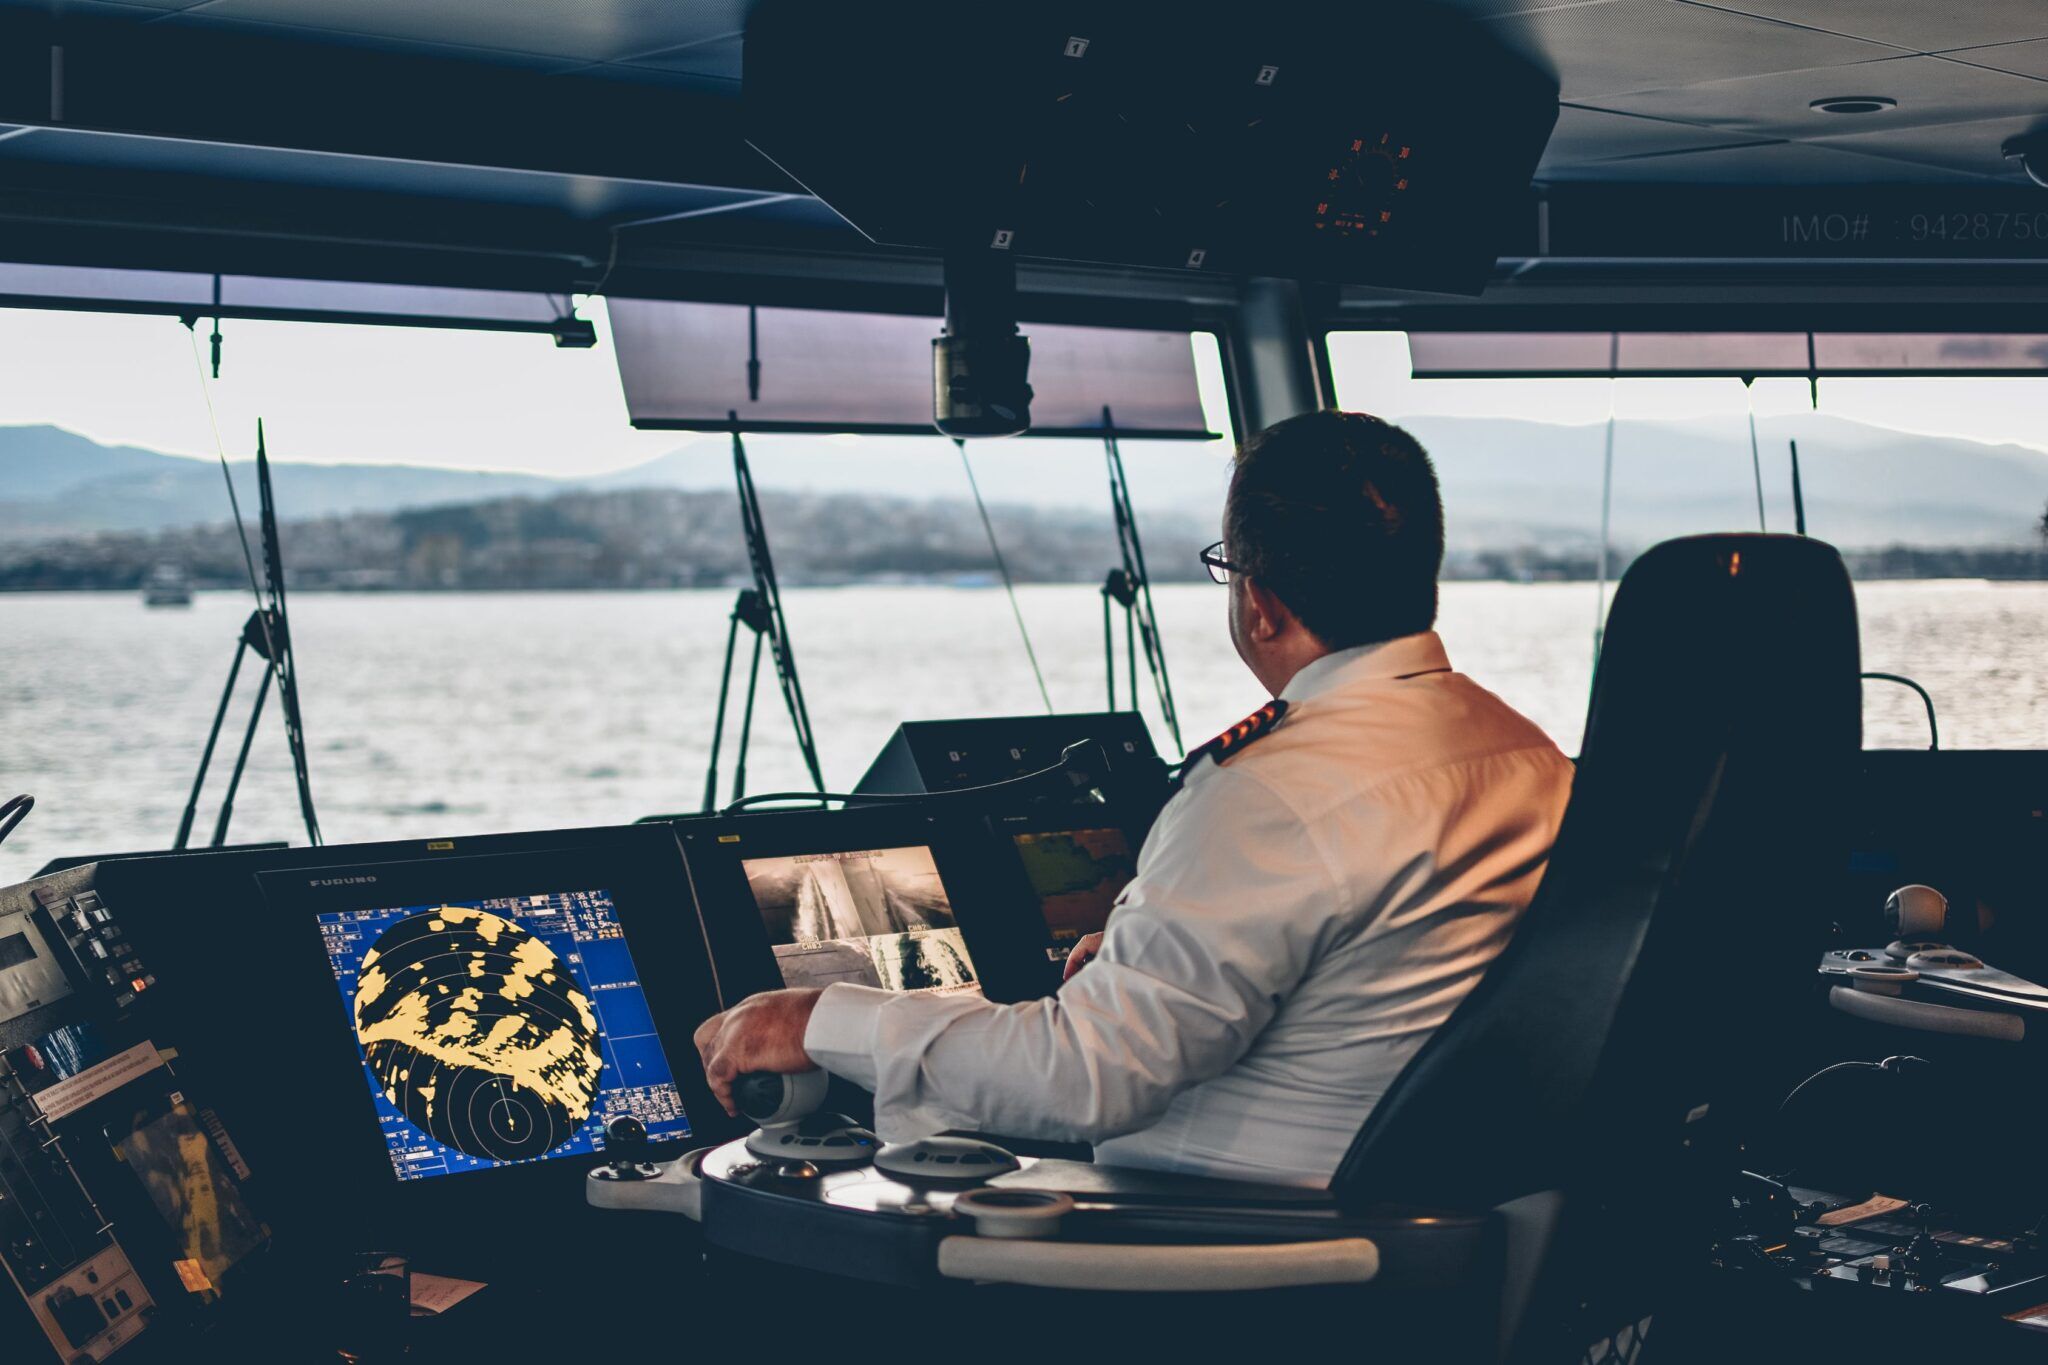 A Master Mariner in his Chair controlling the ship using bridge equipment, machinery controls, and monitors.